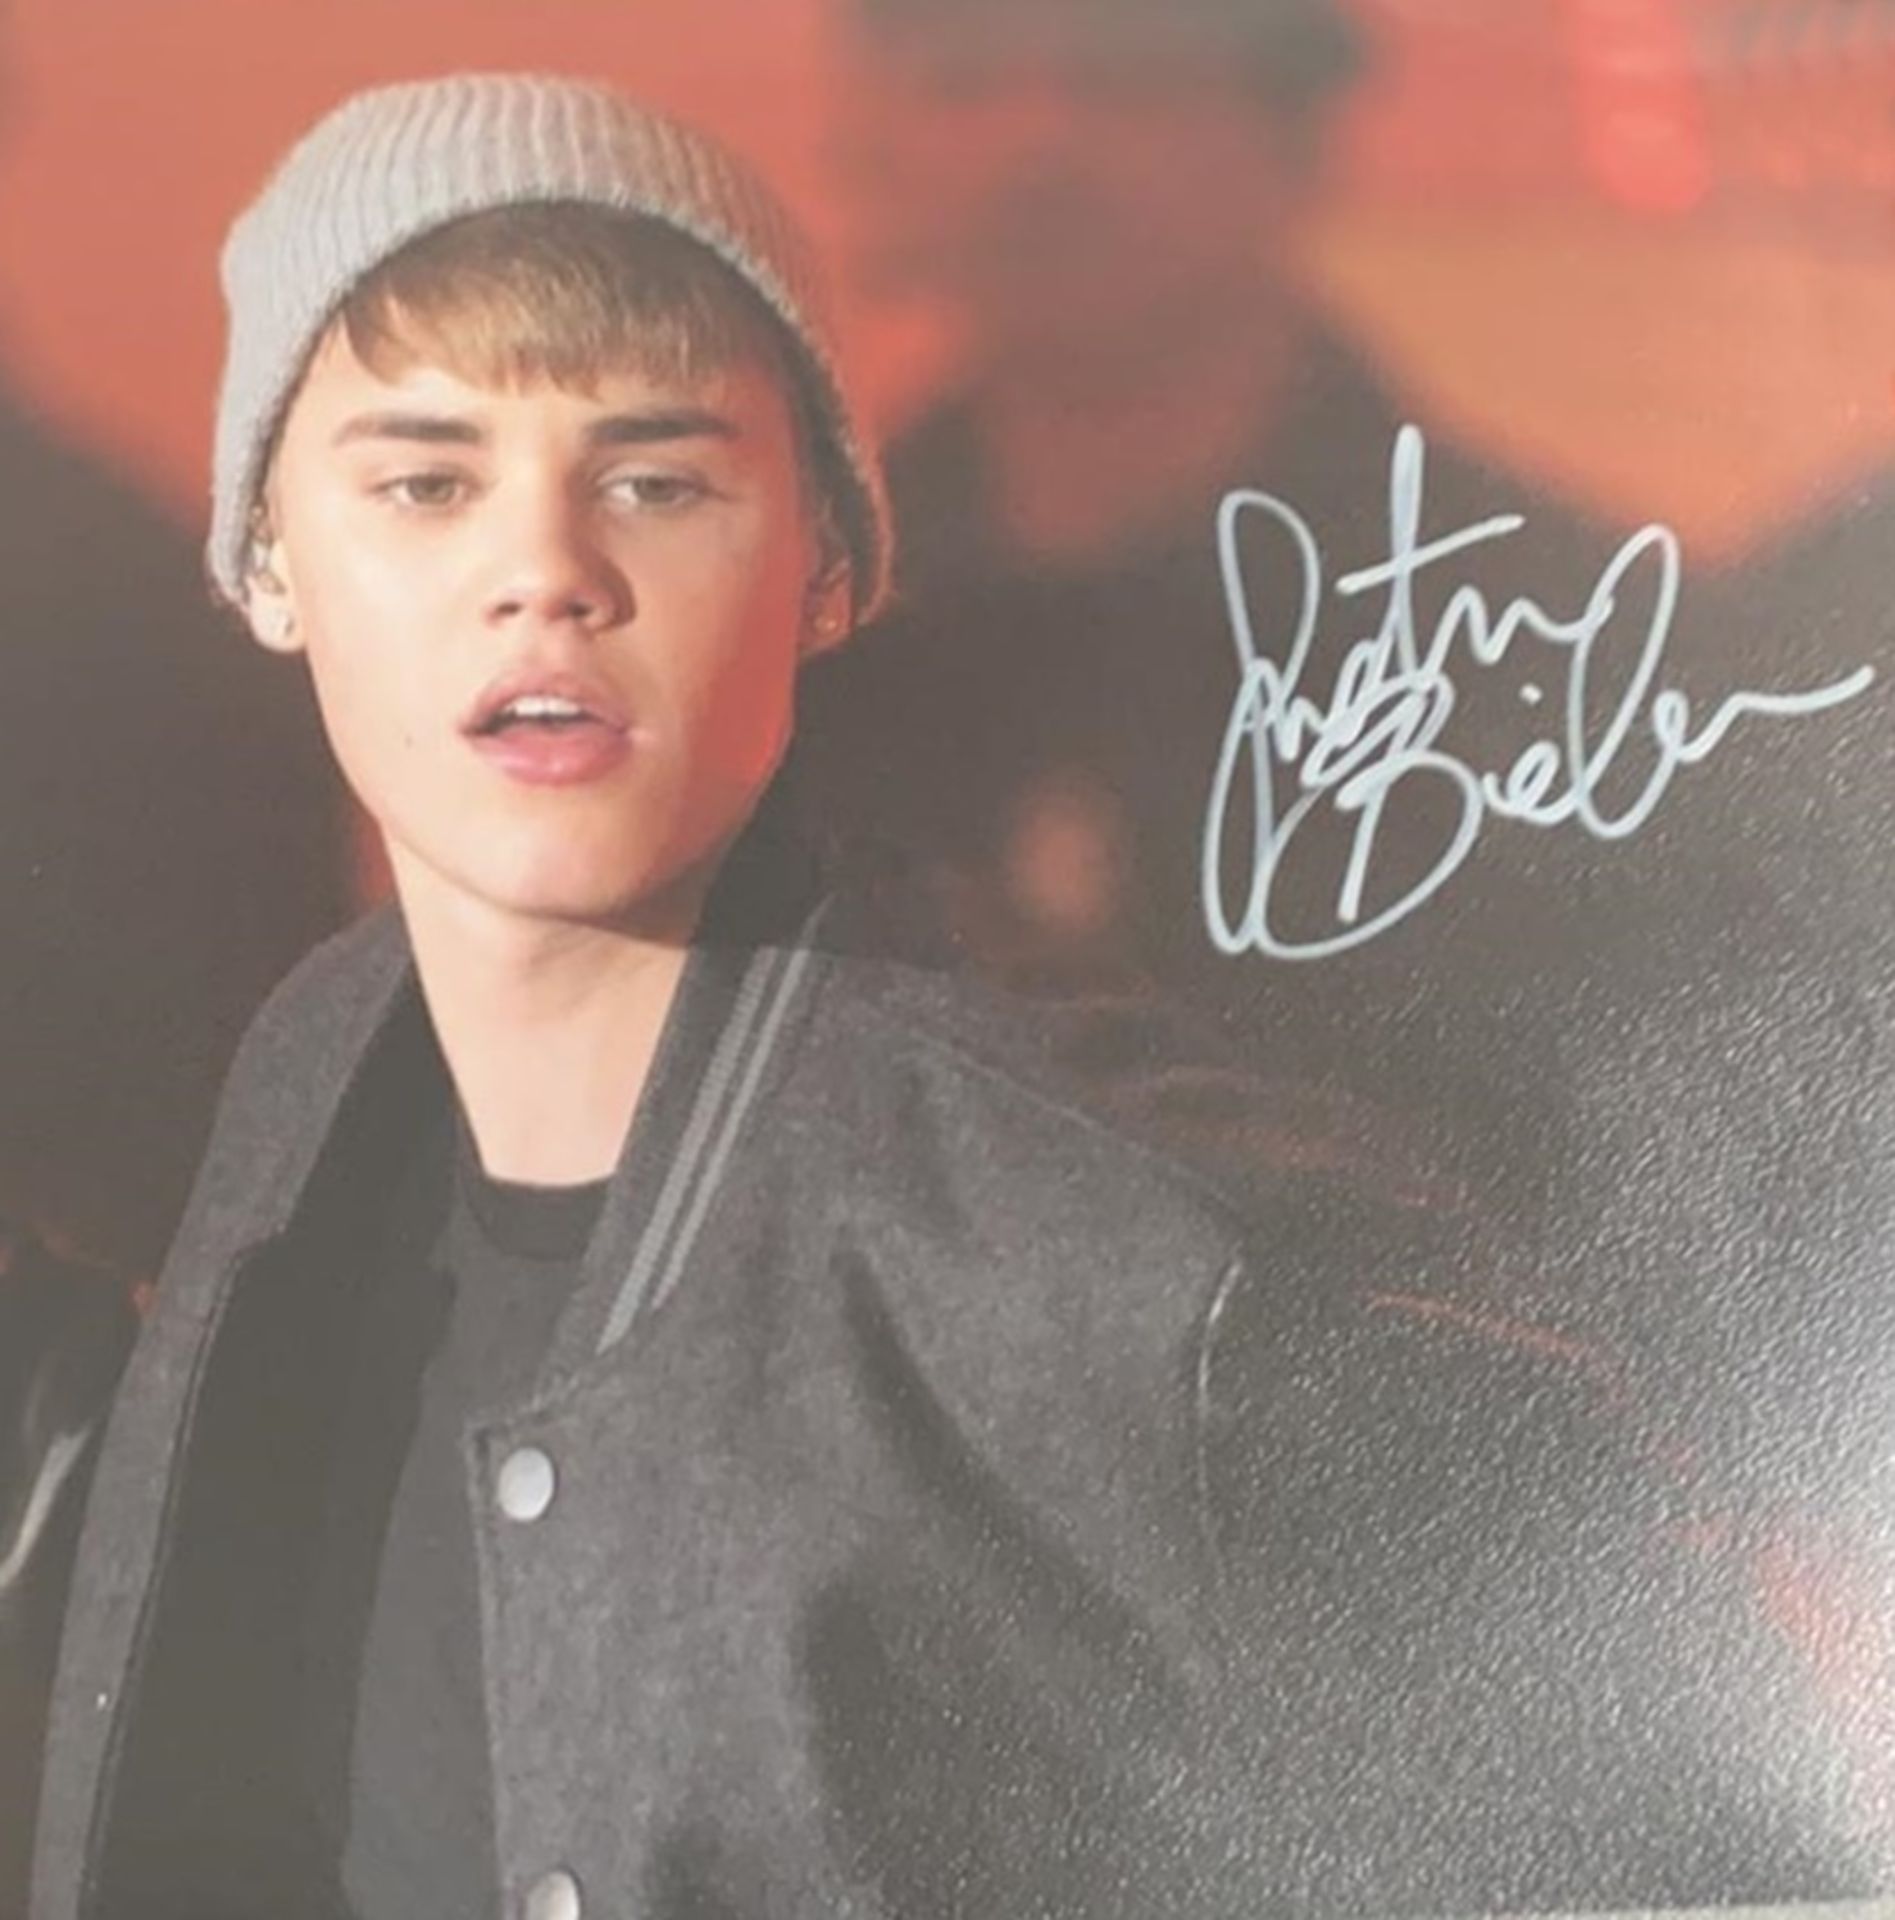 1 x Signed Autograph Picture - JUSTIN BIEBER - With COA - Size 12 x 8 Inch - CL590 - Location: